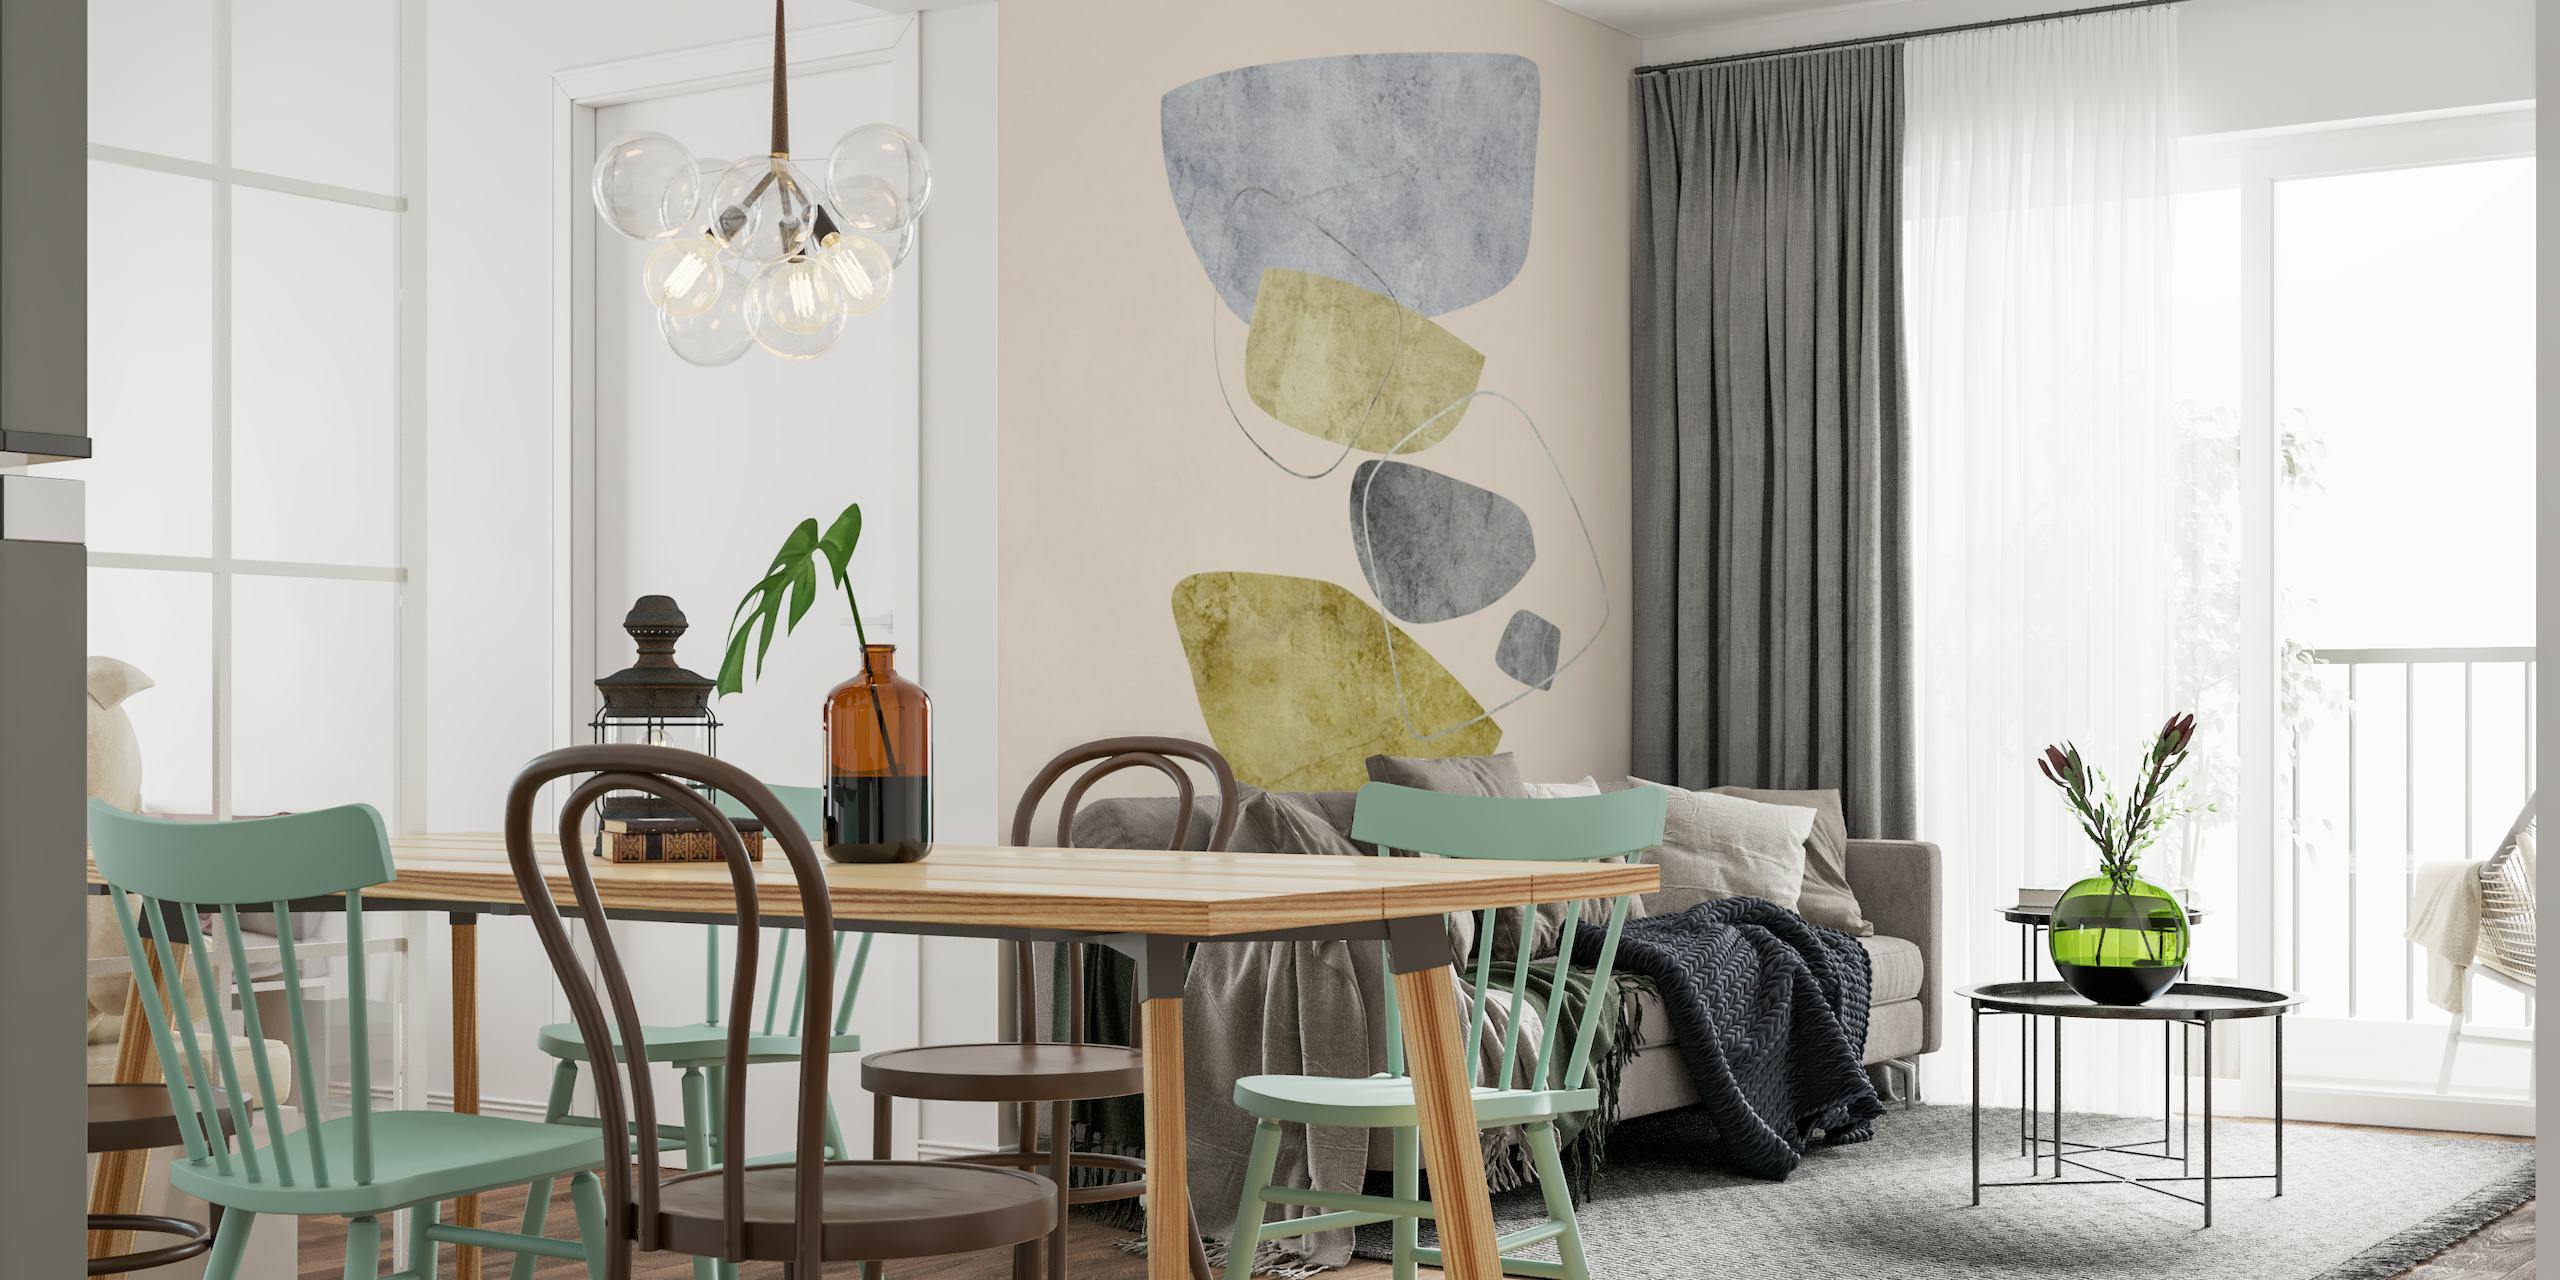 Abstract shapes wall mural in pastel colors including green and grey